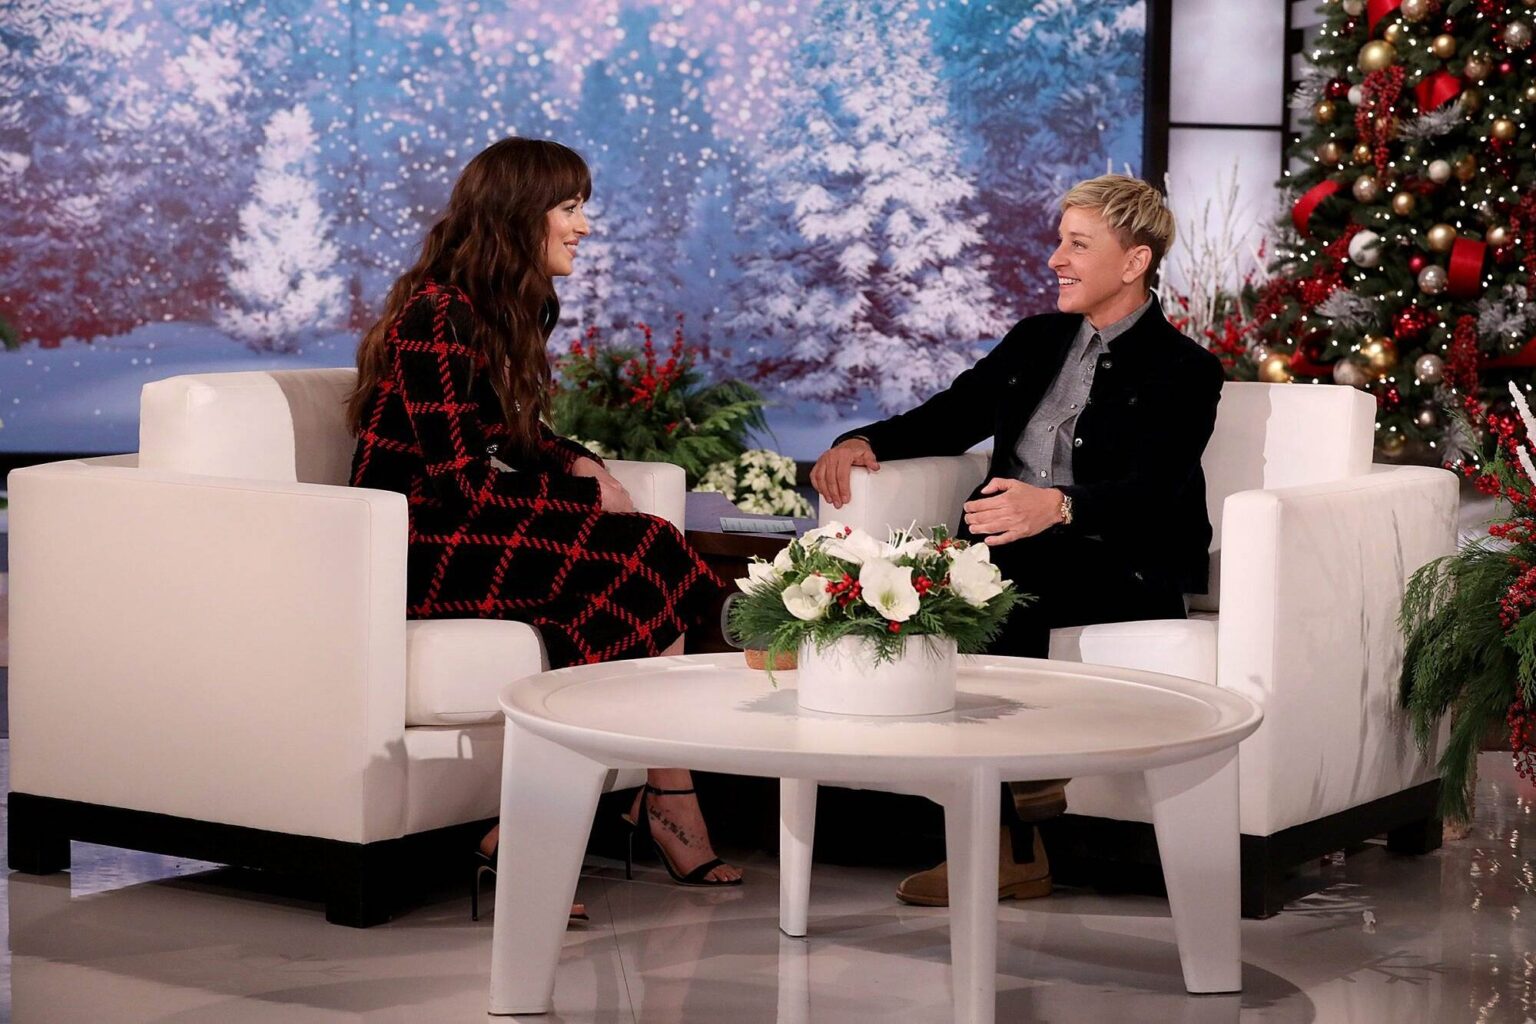 What was the real reason behind Ellen DeGeneres canceling her show? Did it all start with Dakota Johnson's call-out two years ago? Get the tea here.